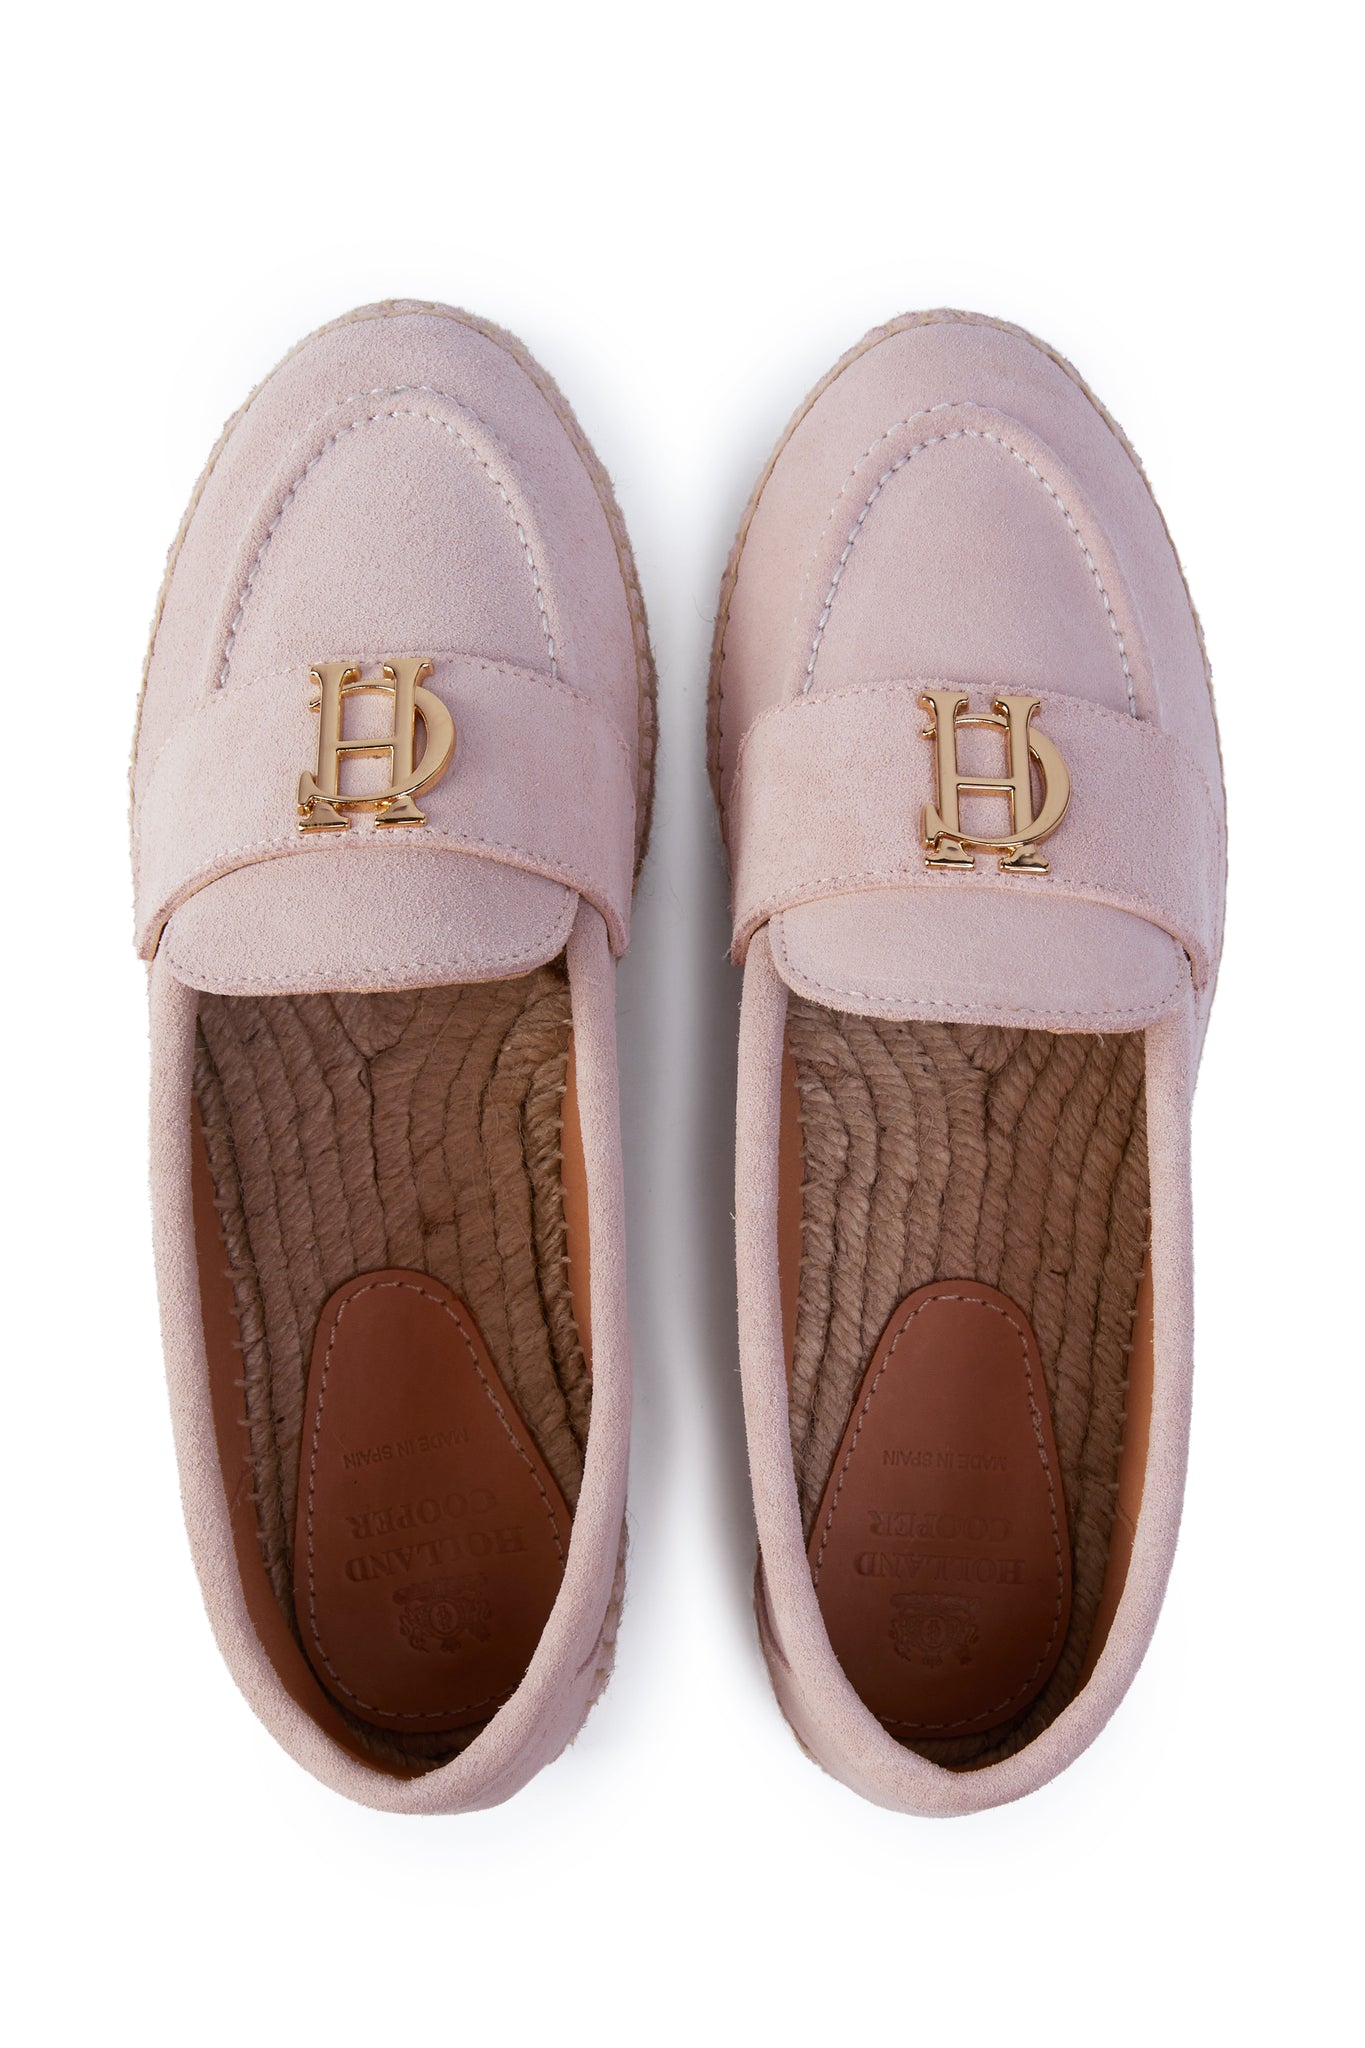 Birds eye view of light pink suede classic espadrille with plaited jute sole and gold hardware on top